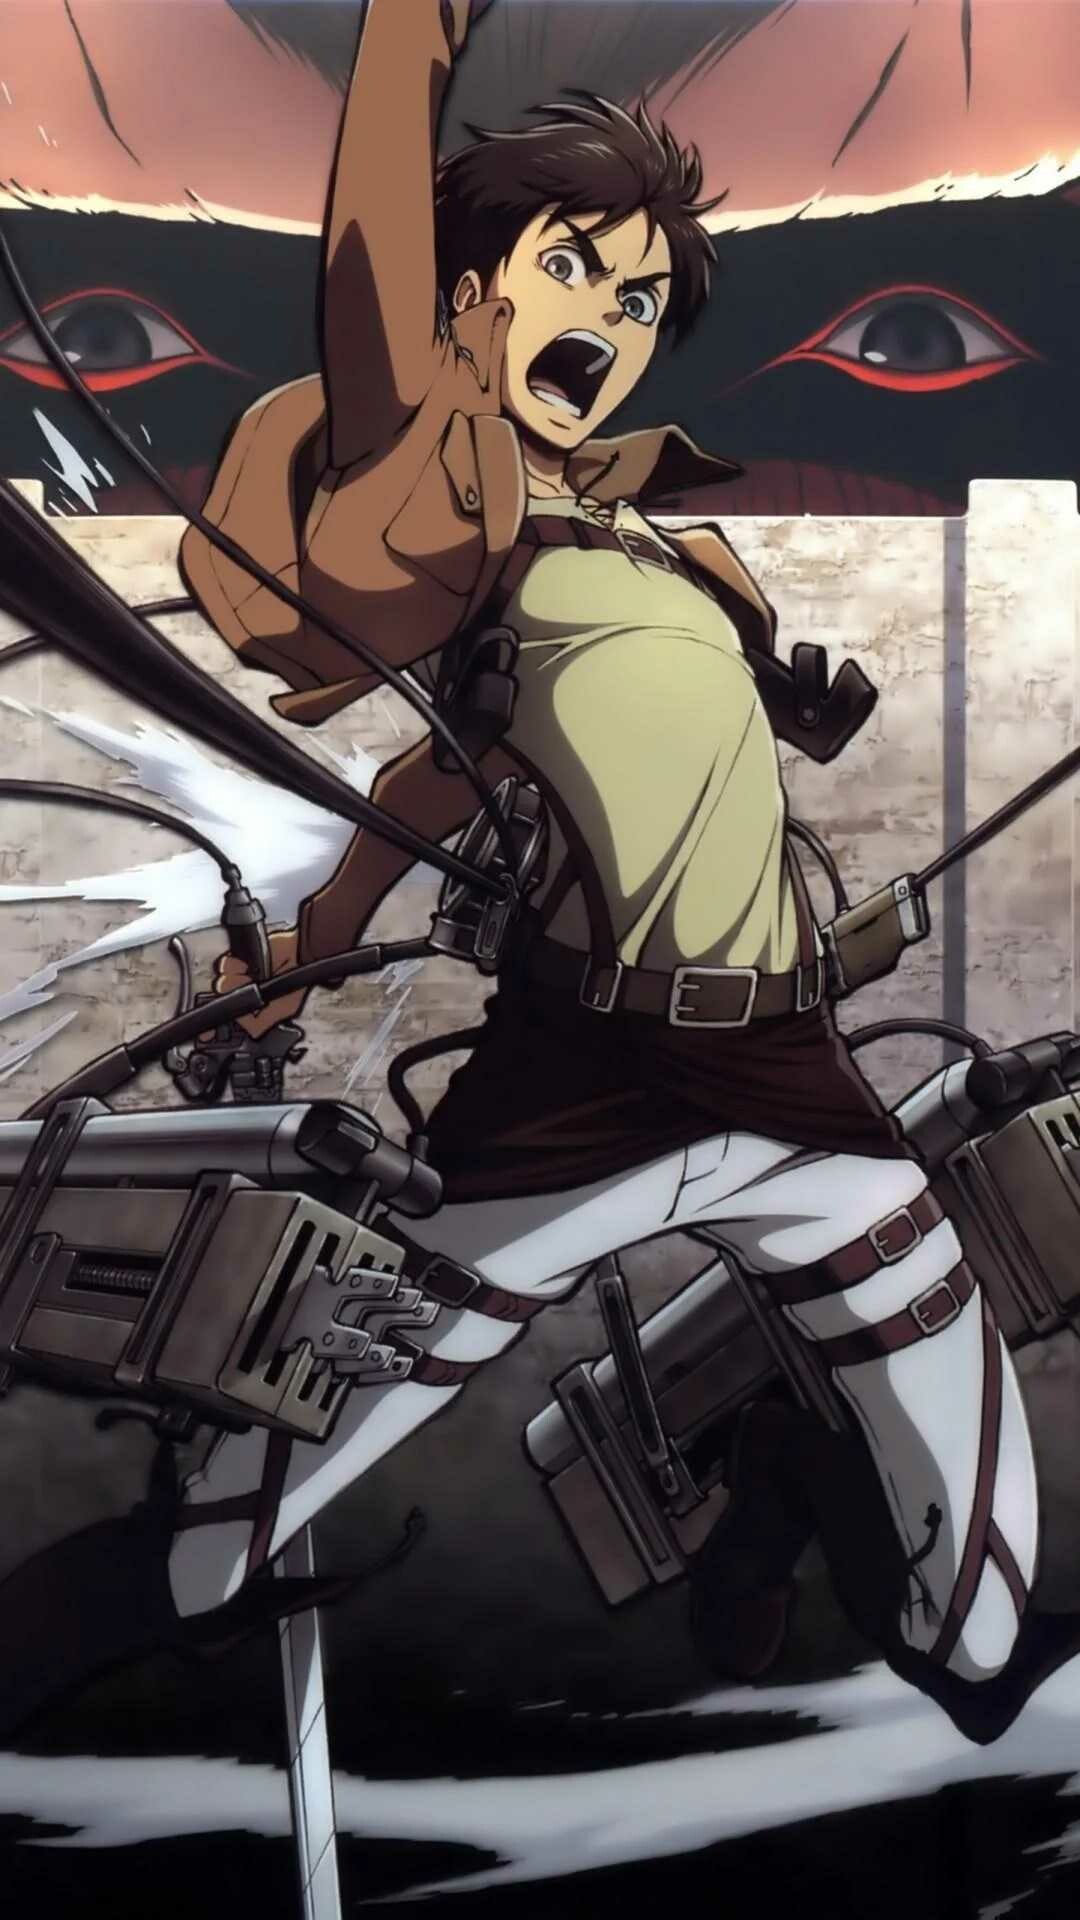 Attack on Titan (TV Series): The story follows Eren Yeager, A boy who vows to exterminate the Titans. 1080x1920 Full HD Background.